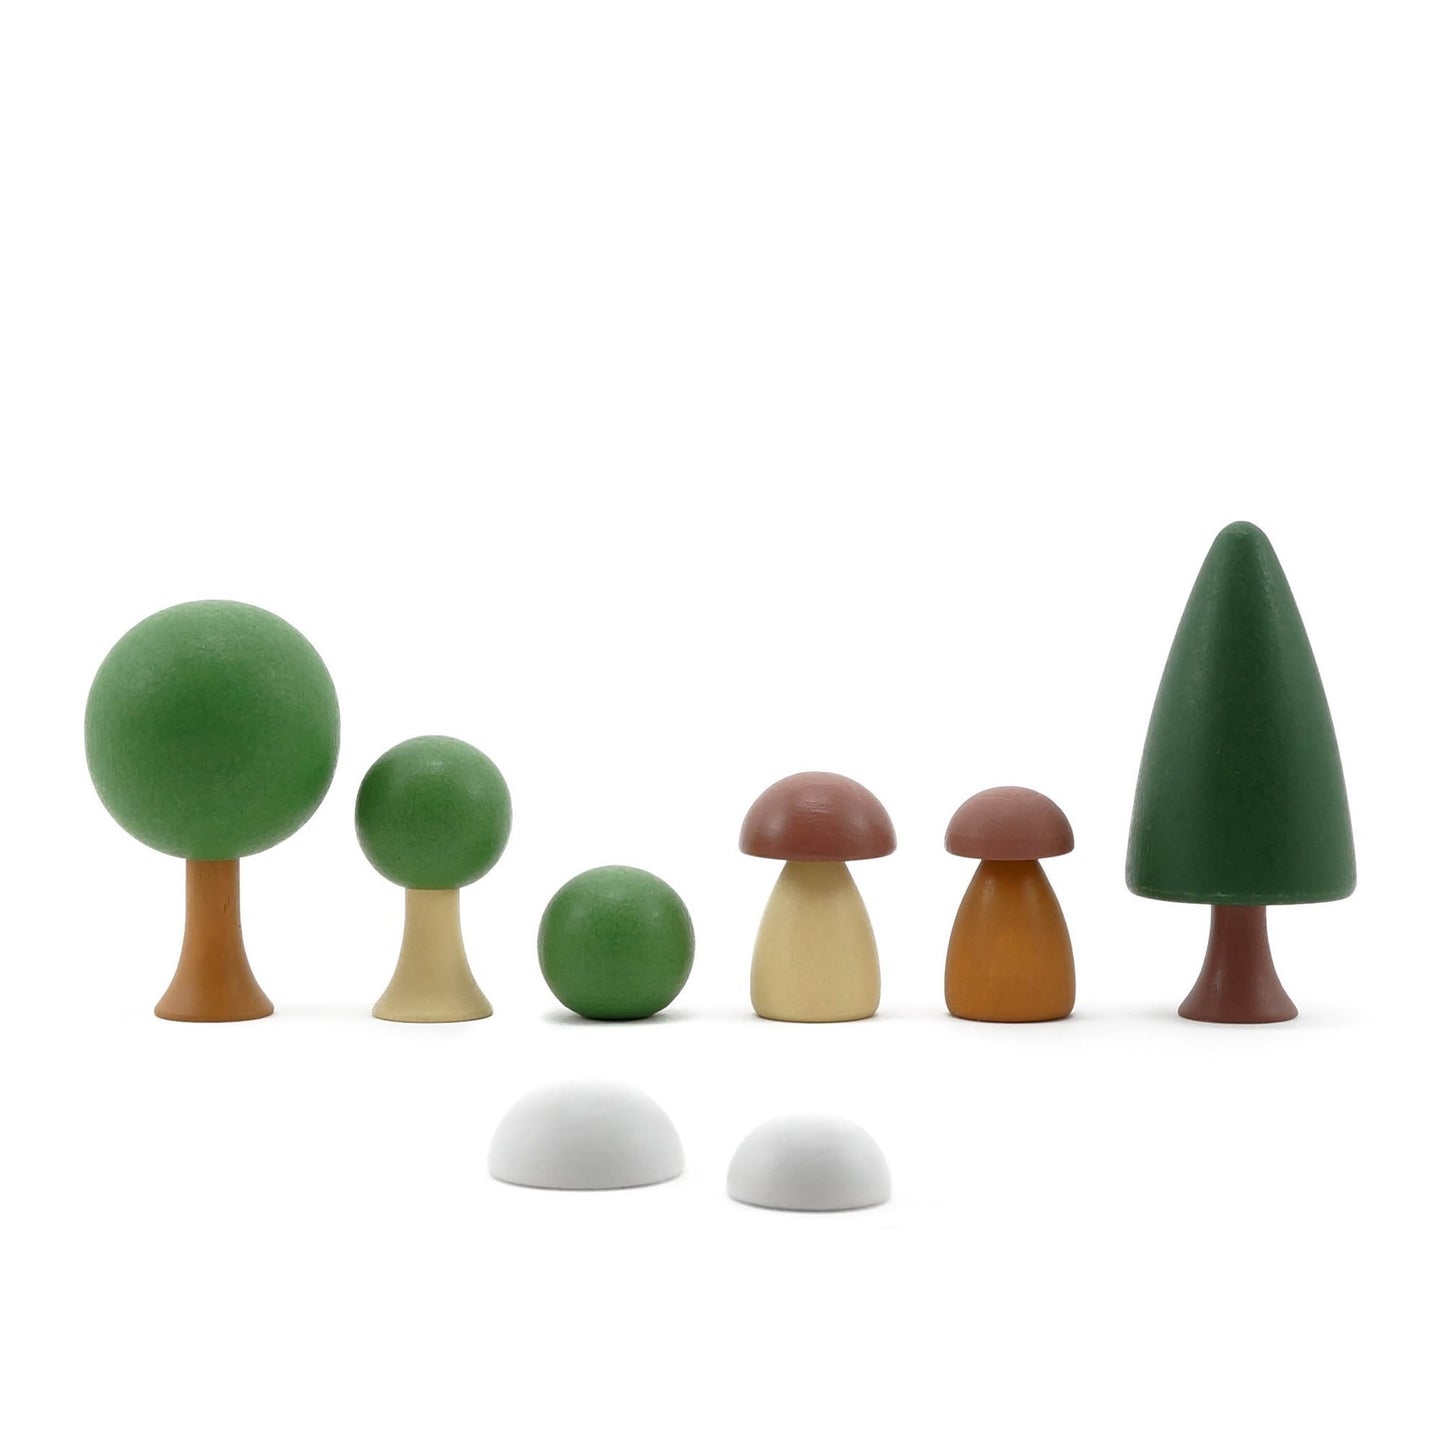 CLiCQUES Magnetic Garden - Summer - Wood Wood Toys Canada's Favourite Montessori Toy Store